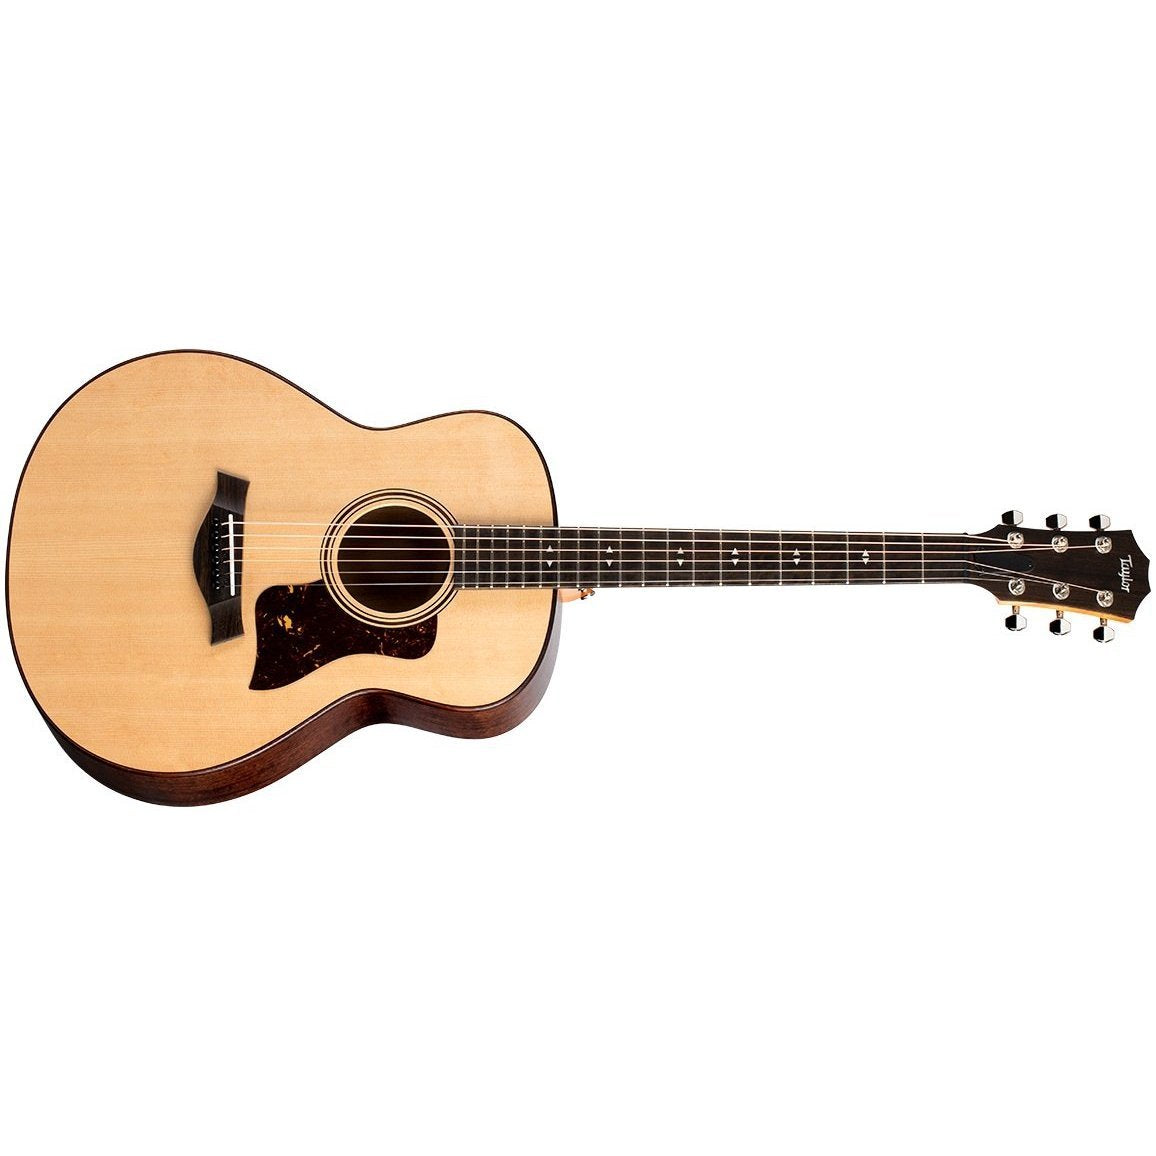 Taylor GT Urban Ash Acoustic Guitar with Aerocase (Discontinued)-Music World Academy